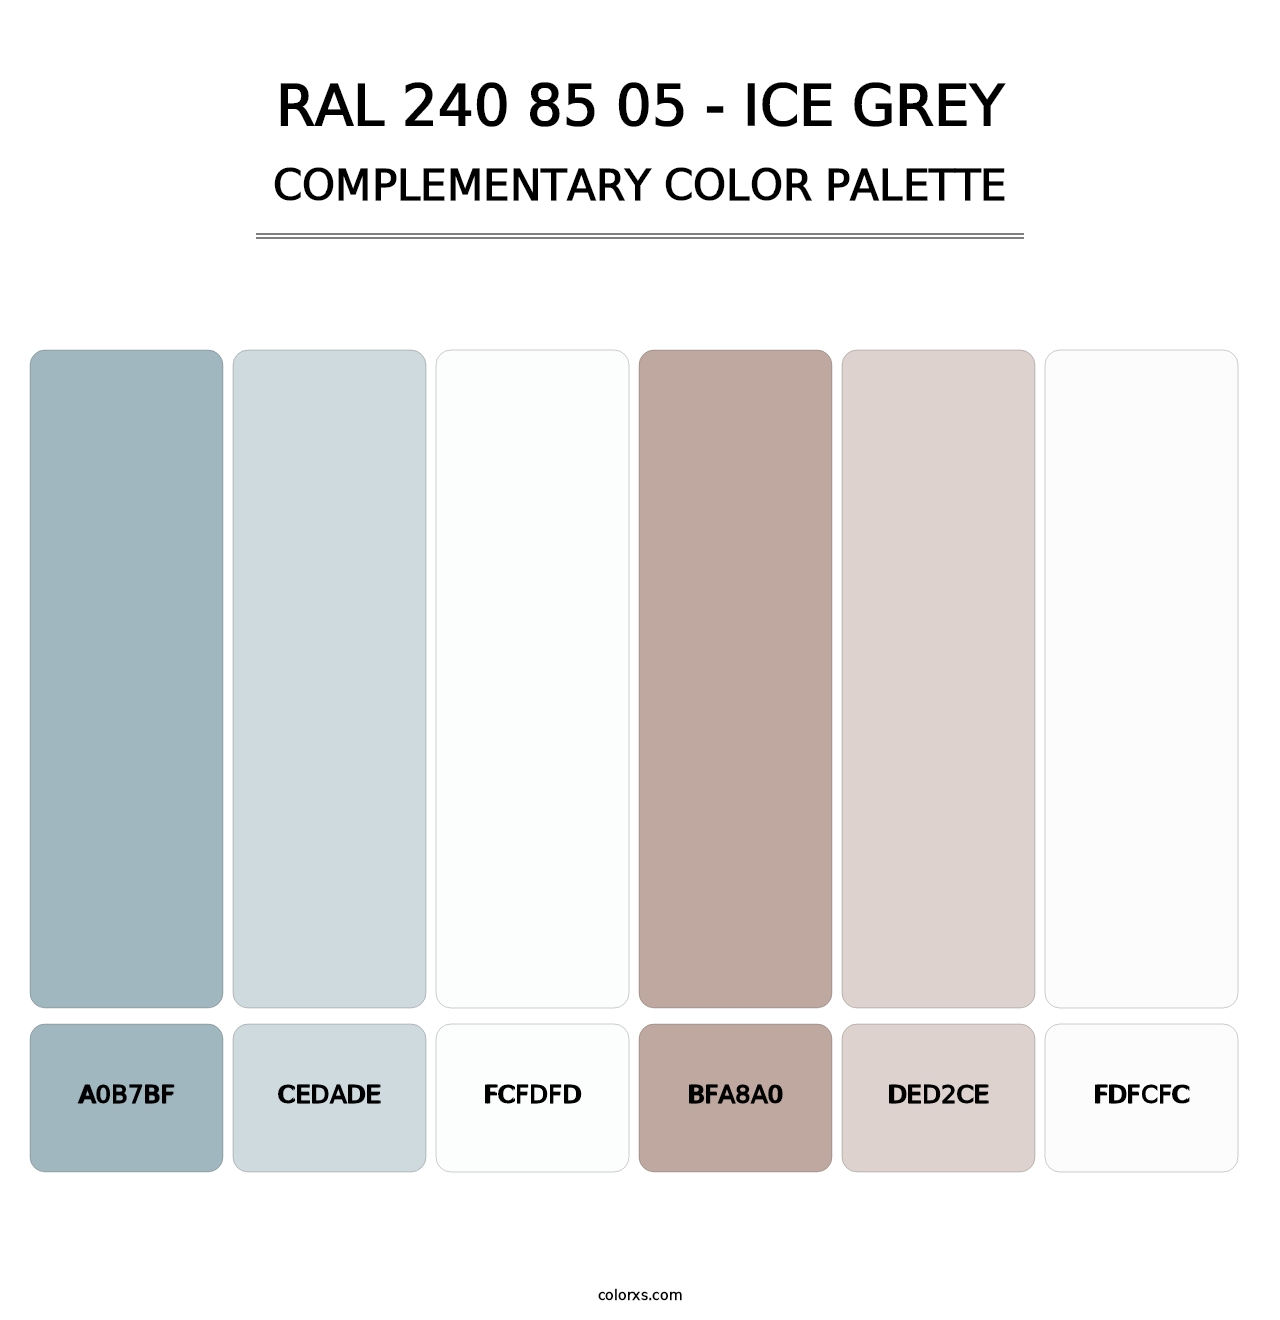 RAL 240 85 05 - Ice Grey - Complementary Color Palette